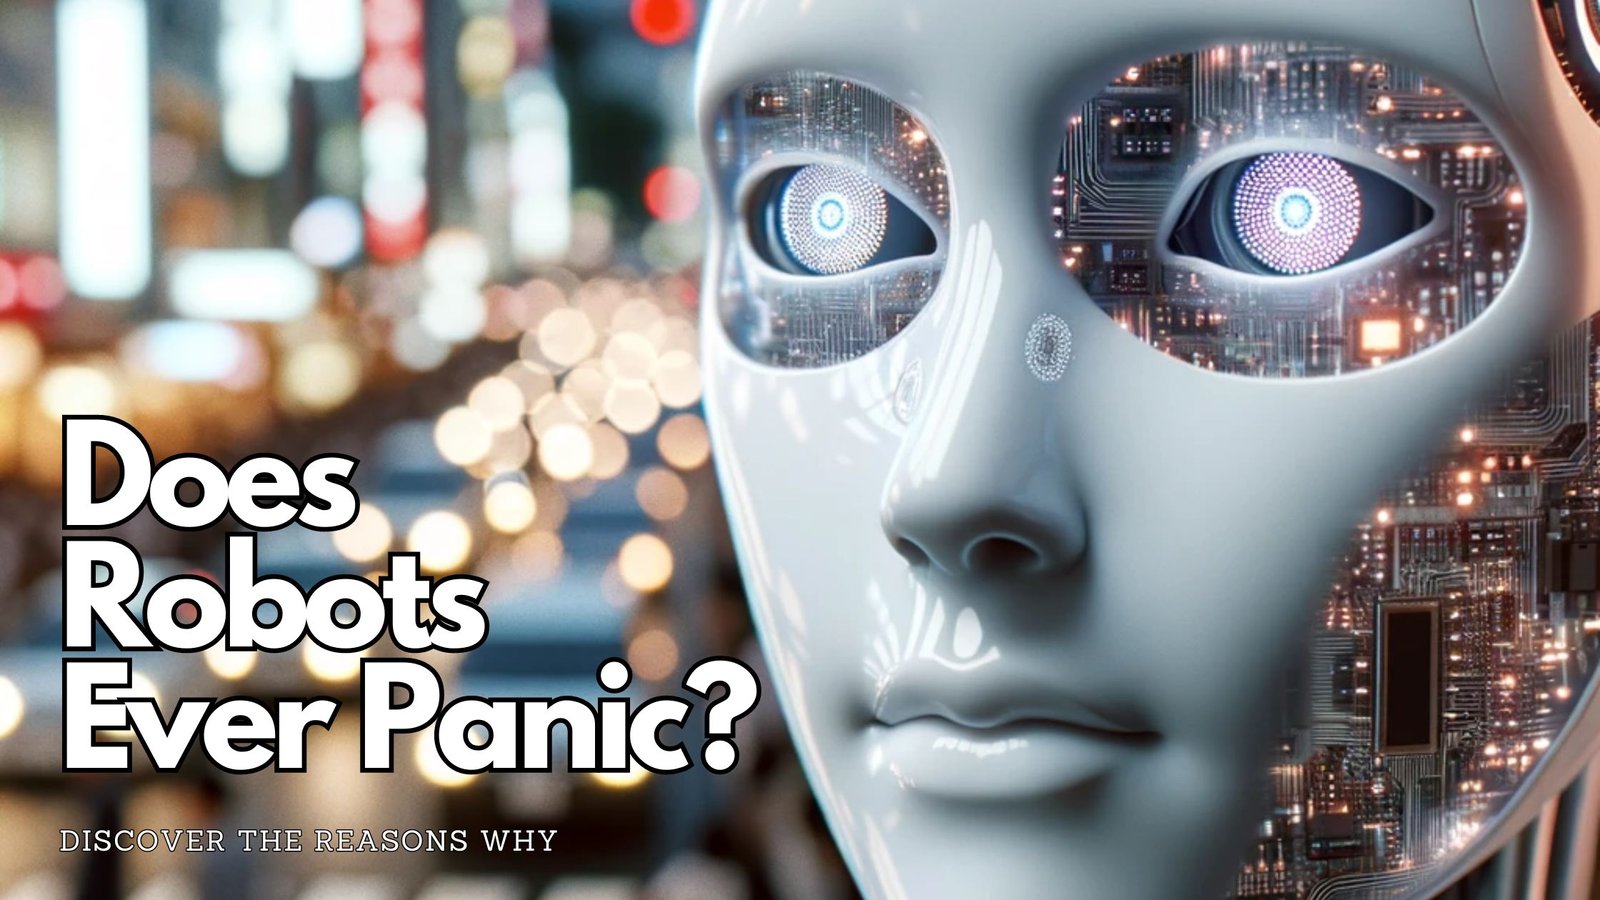 Discover the Reasons: Why Don #39 t Robots Ever Panic?